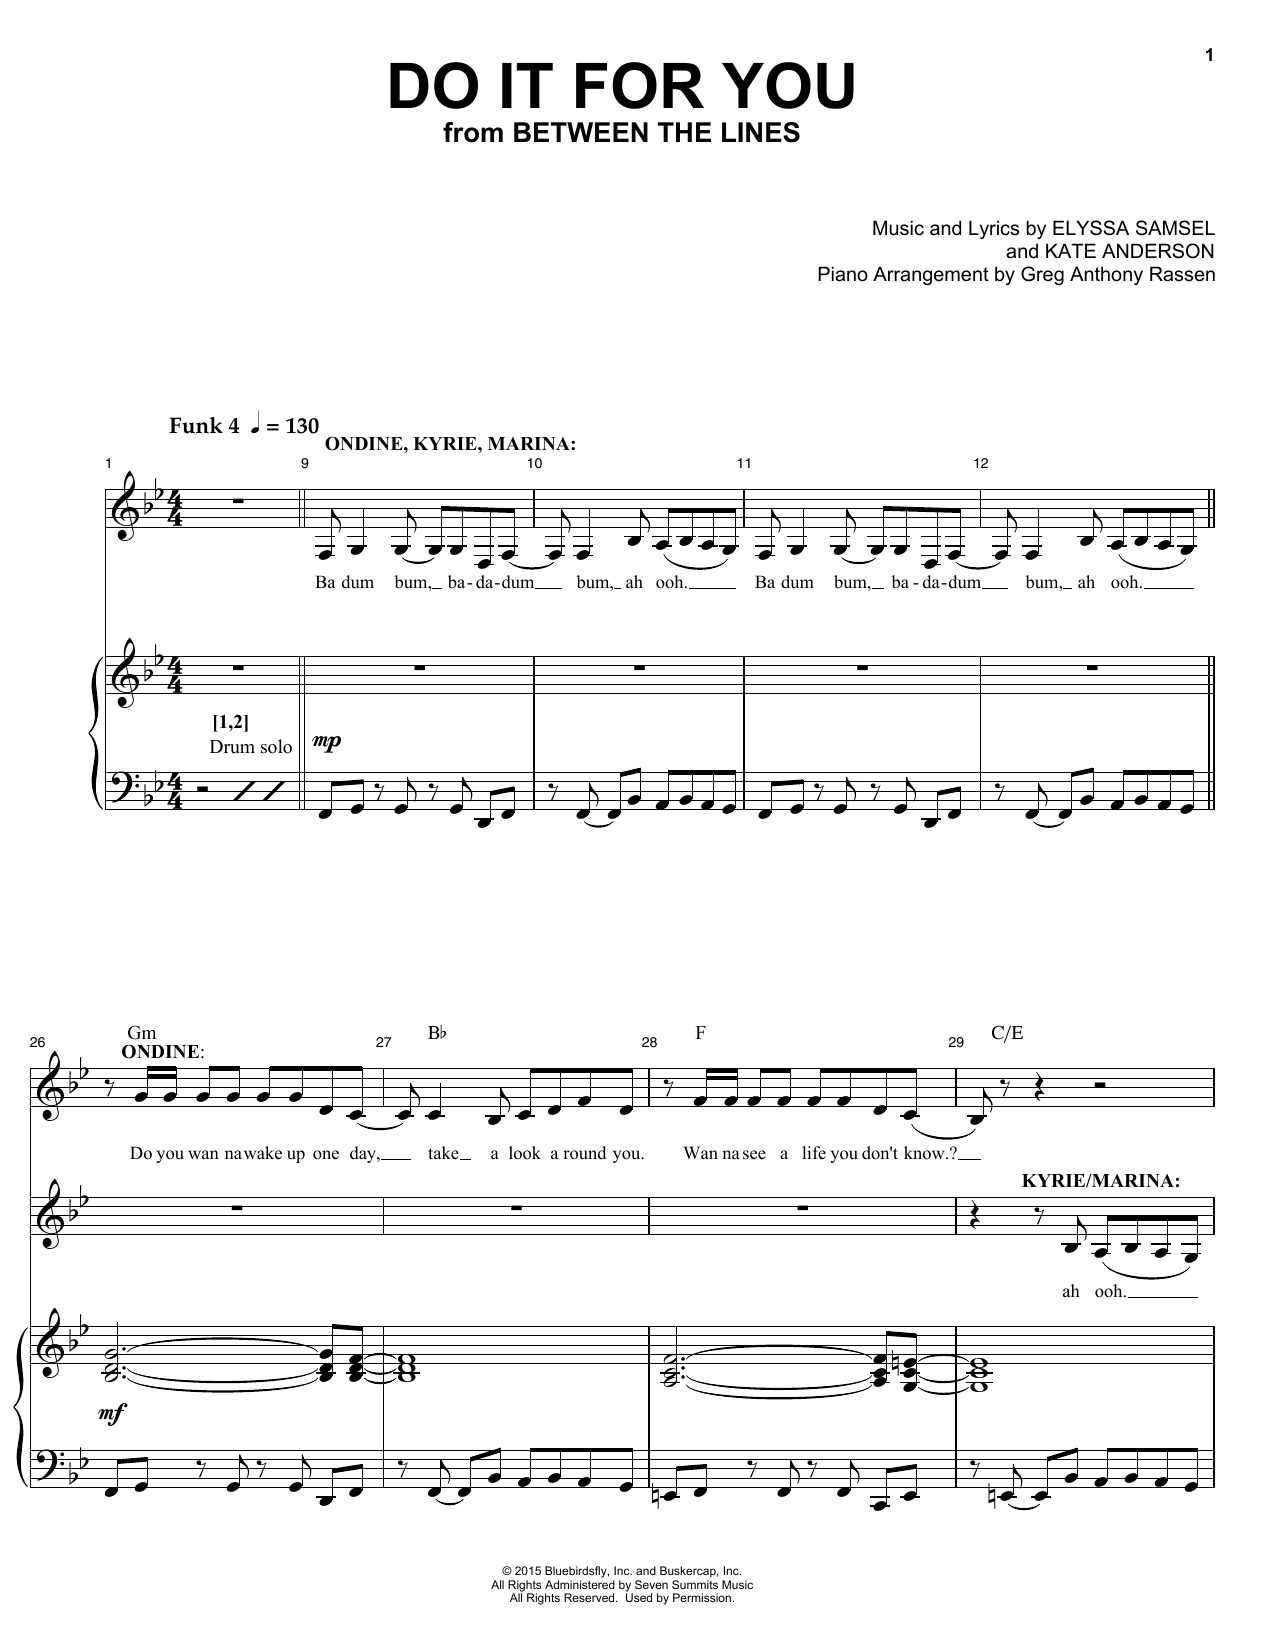 Download Elyssa Samsel & Kate Anderson Do It For You (from Between The Lines) Sheet Music